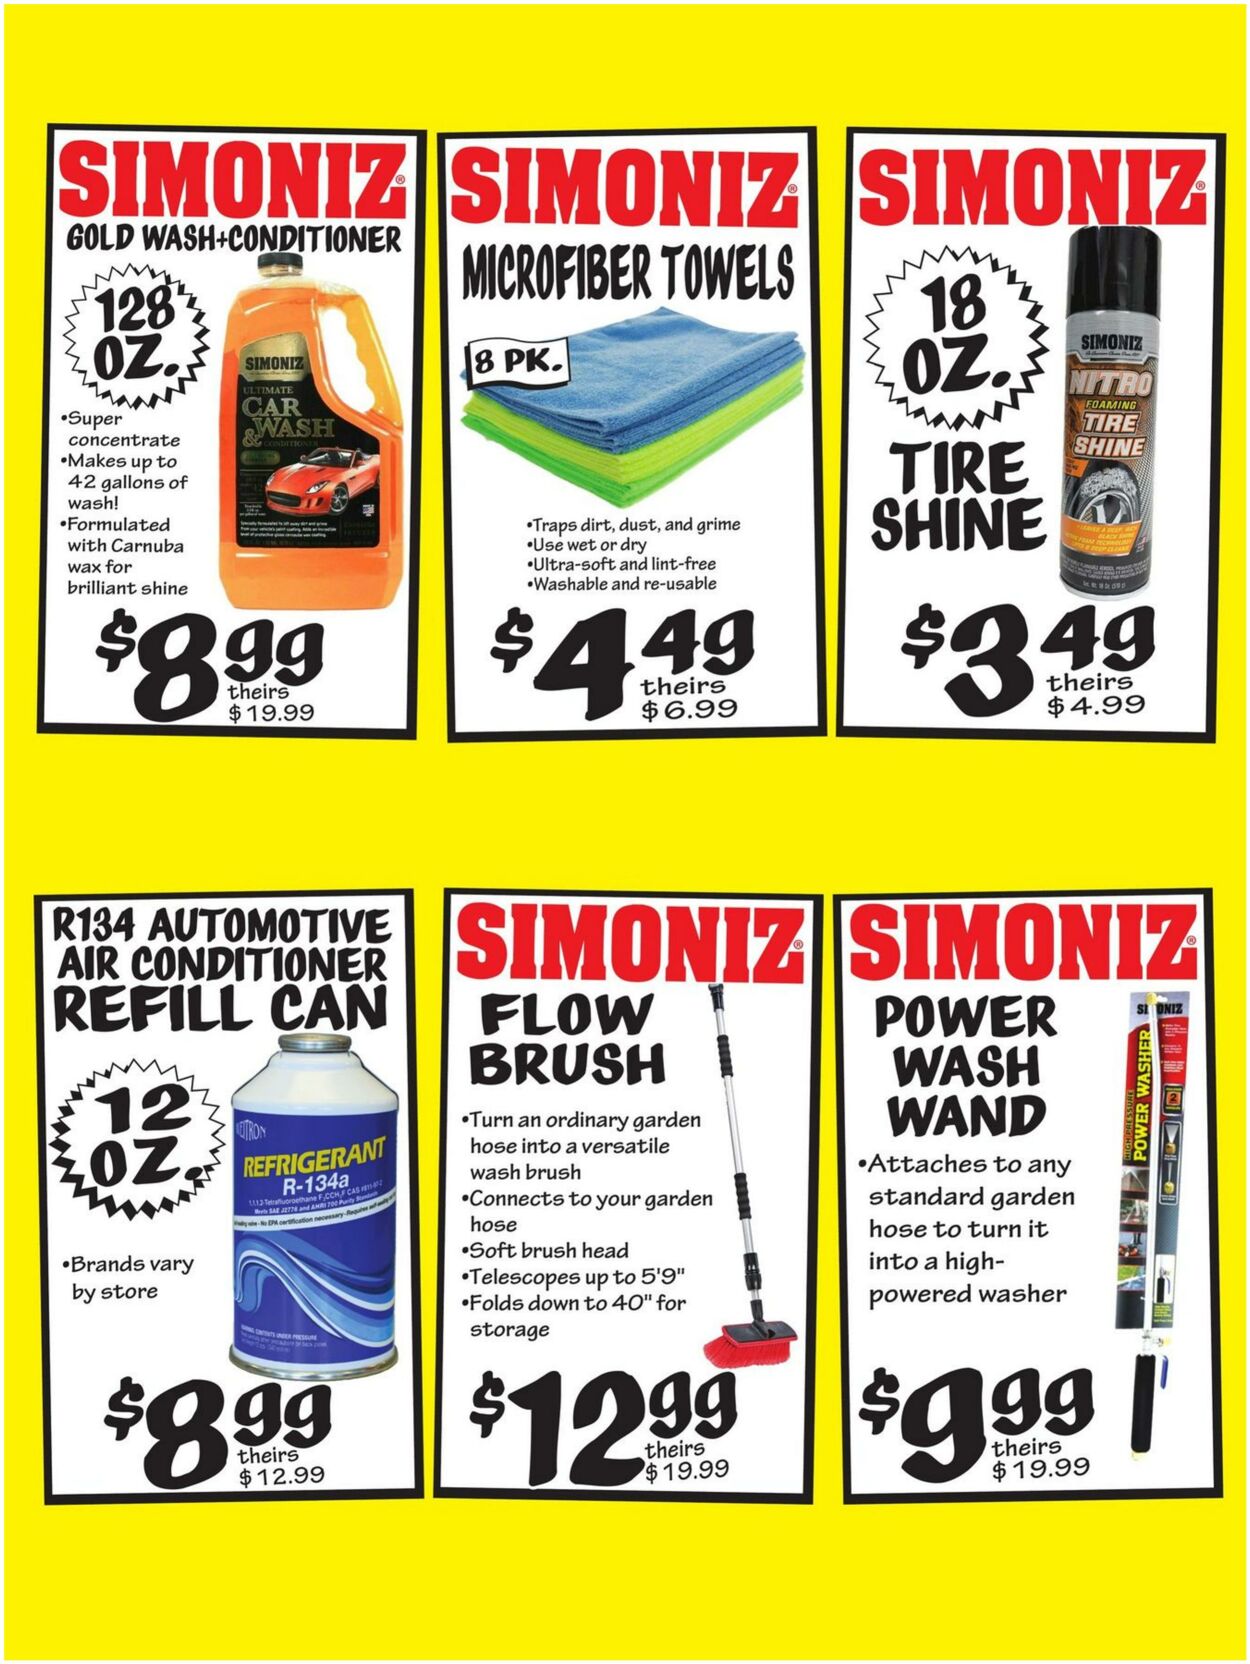 Weekly ad Ollie's 06/22/2022 - 06/28/2022